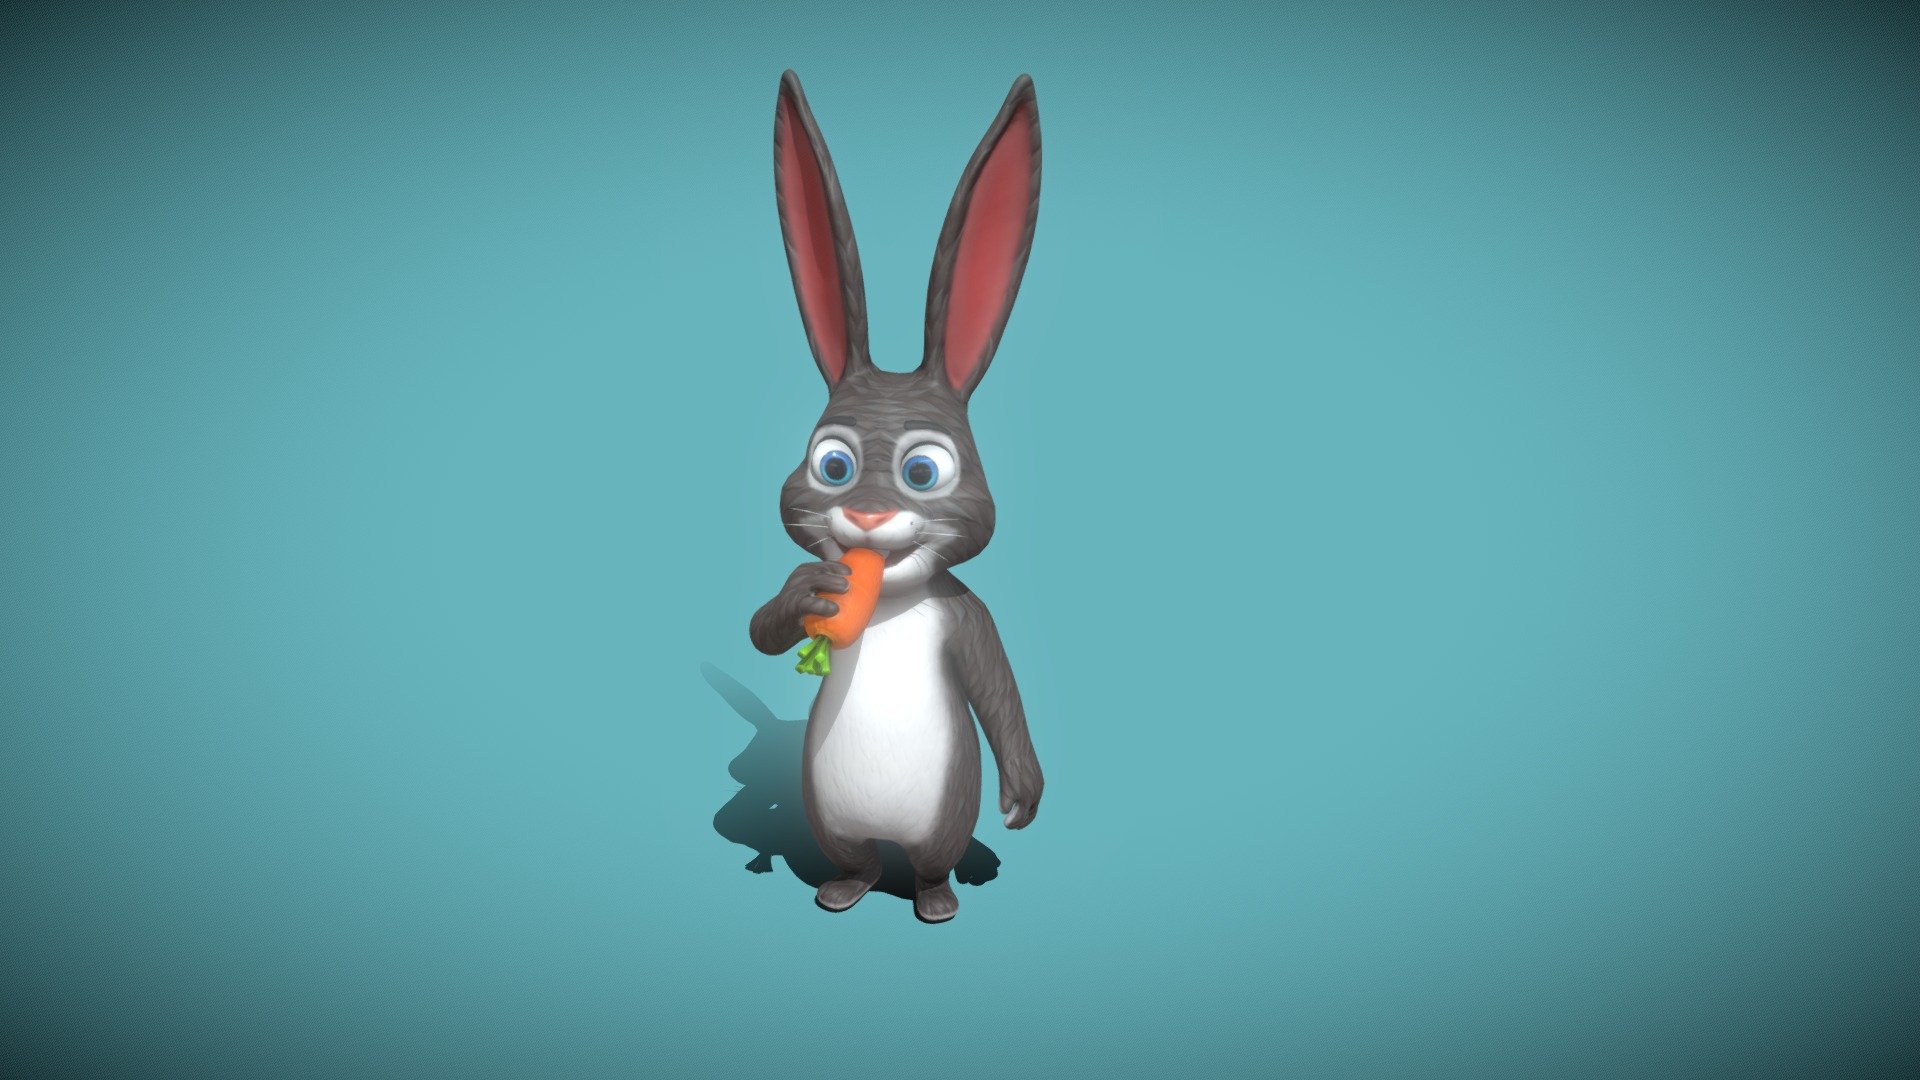 Cartoon Rabbit Animated 3D Model is completely ready to be used in your games, animations, films, designs etc.  

All textures and materials are included and mapped in every format. The model is completely ready for use visualization in any 3d software and engine.  

Technical details:  




File formats included in the package are: FBX, OBJ, GLB, ABC, DAE, PLY, STL, BLEND, gLTF (generated), USDZ (generated)

Native software file format: BLEND

Render engine: Eevee

Polygons: 7,968

Vertices: 7,922

Carrot is included - polygons: 706, vertices: 722

Textures: Color, Metallic, Roughness, Normal, AO.

All textures are 2k resolution.

The model is rigged and animated.

6 animations are included: idle, idle (eating), talk, walk, run, jump. All animations are full cycles.

You can see all animations on YouTube -&gt; https://www.youtube.com/watch?v=FDo11UA5-B0

Only following formats contain rig and animation: BLEND, FBX, GLTF/GLB
 - Cartoon Rabbit Animated 3D Model - Buy Royalty Free 3D model by 3DDisco 3d model